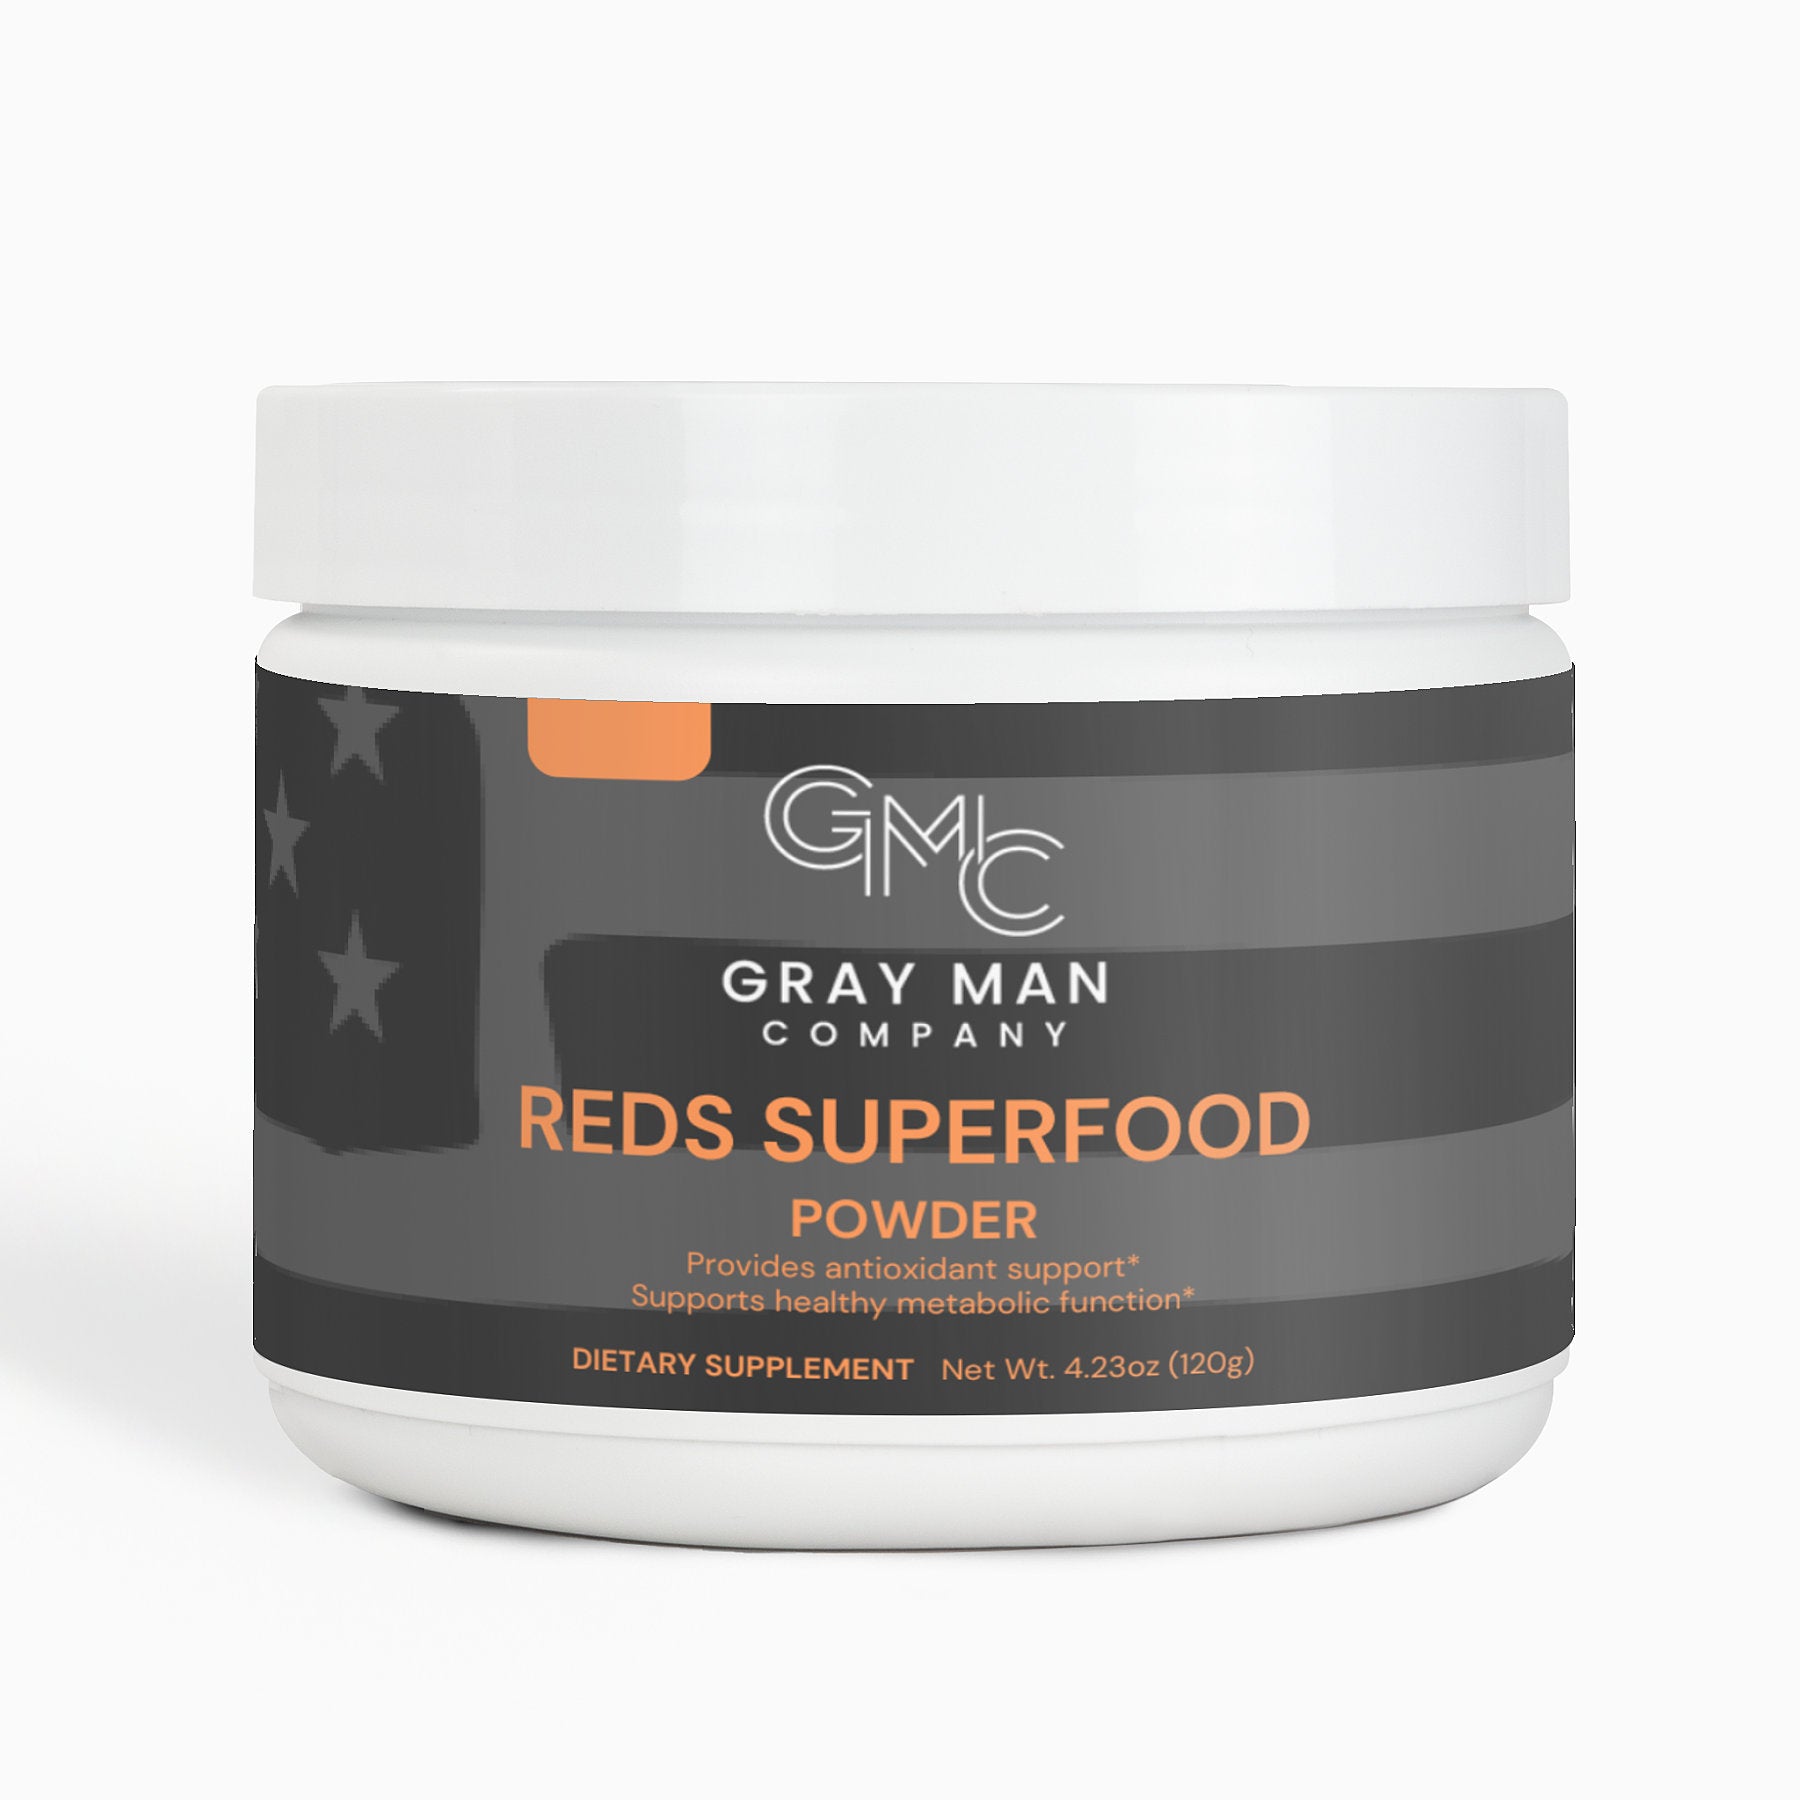 Gray Man Company Reds Superfood Performance Health Supplement